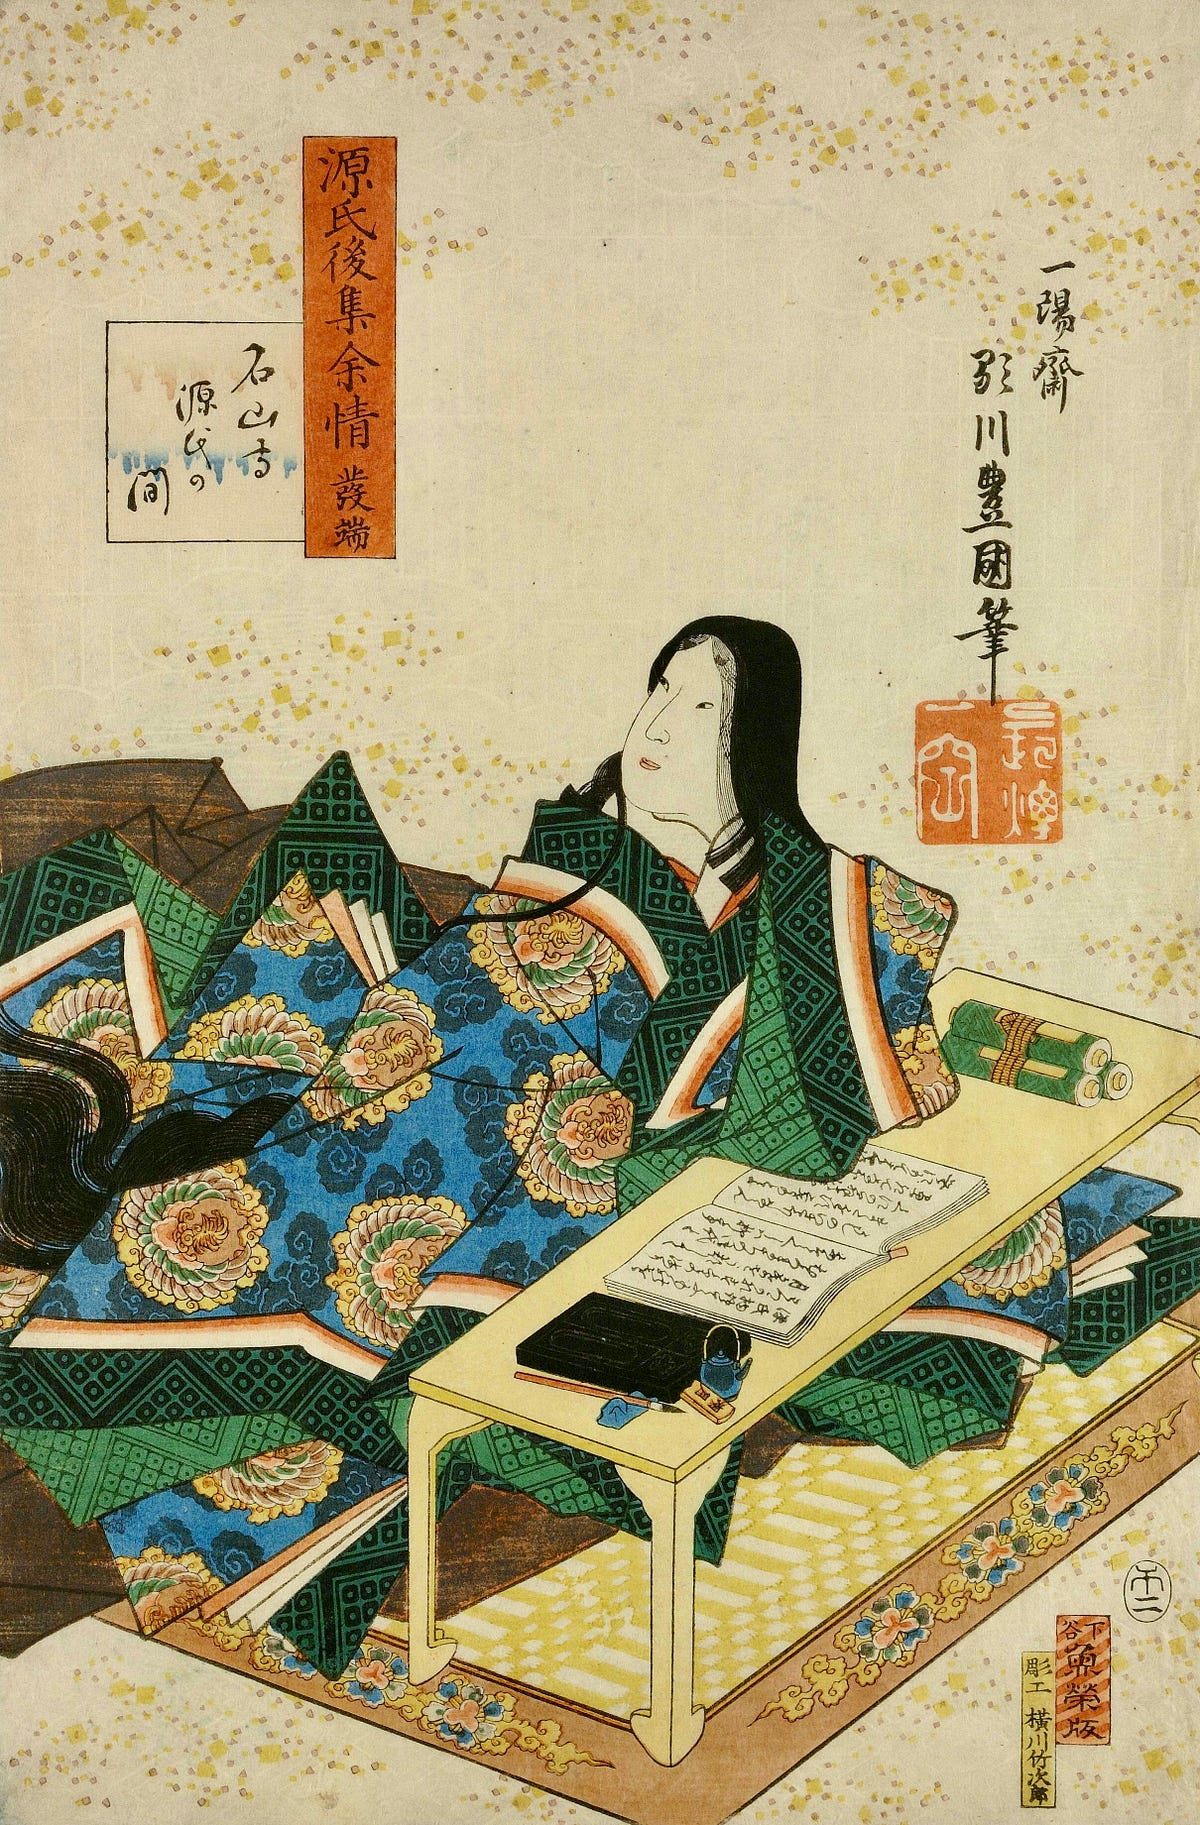 Woman in kimono sitting at low table.